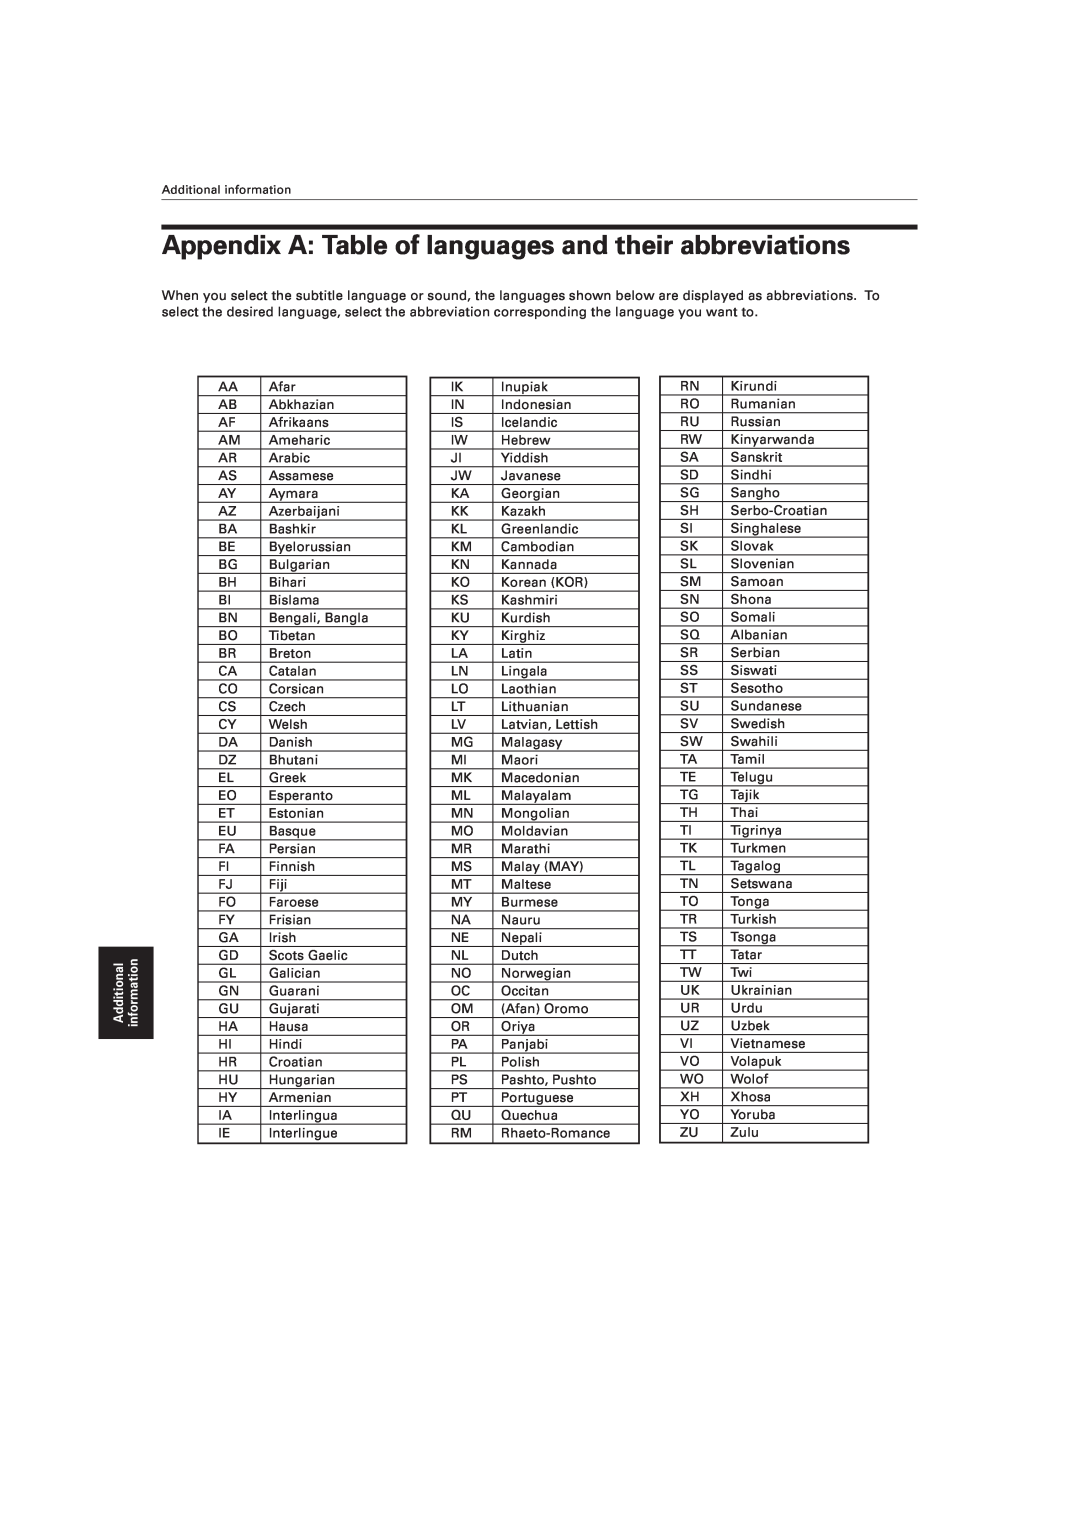 JVC XV-521BK manual Appendix A Table of languages and their abbreviations 